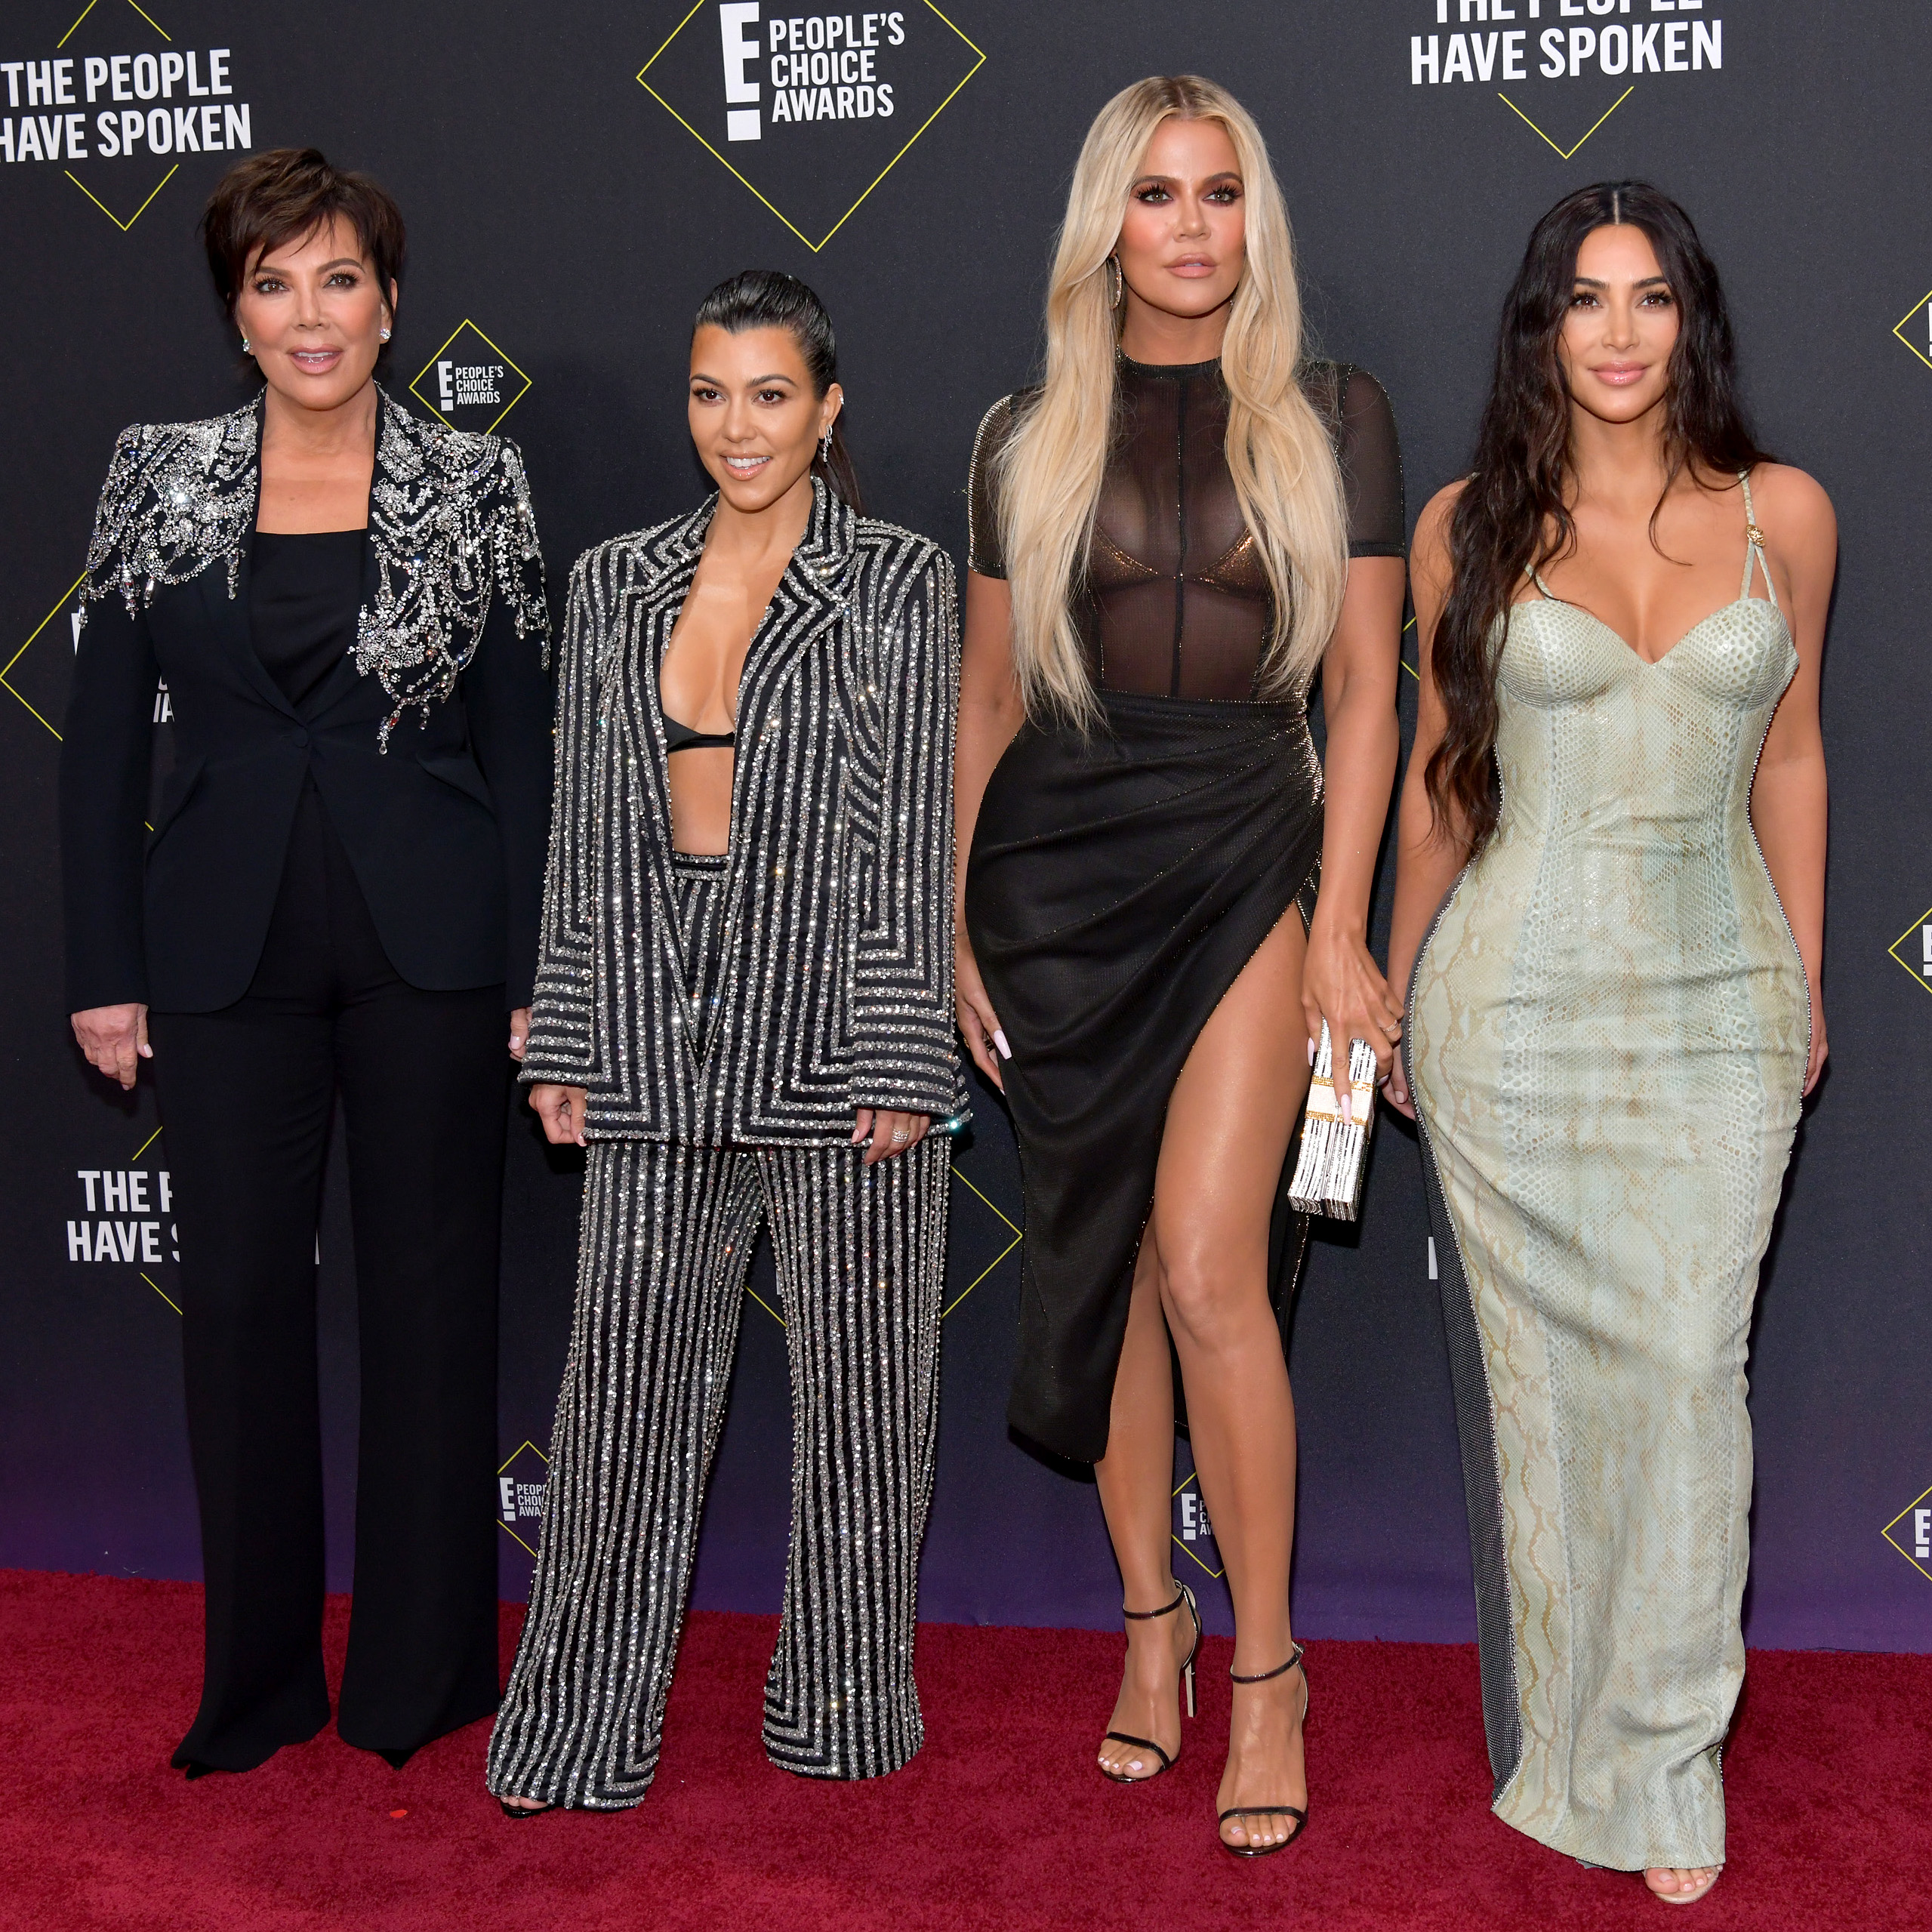 Kim and Khloe are up for the same award at the People's Choice Awards